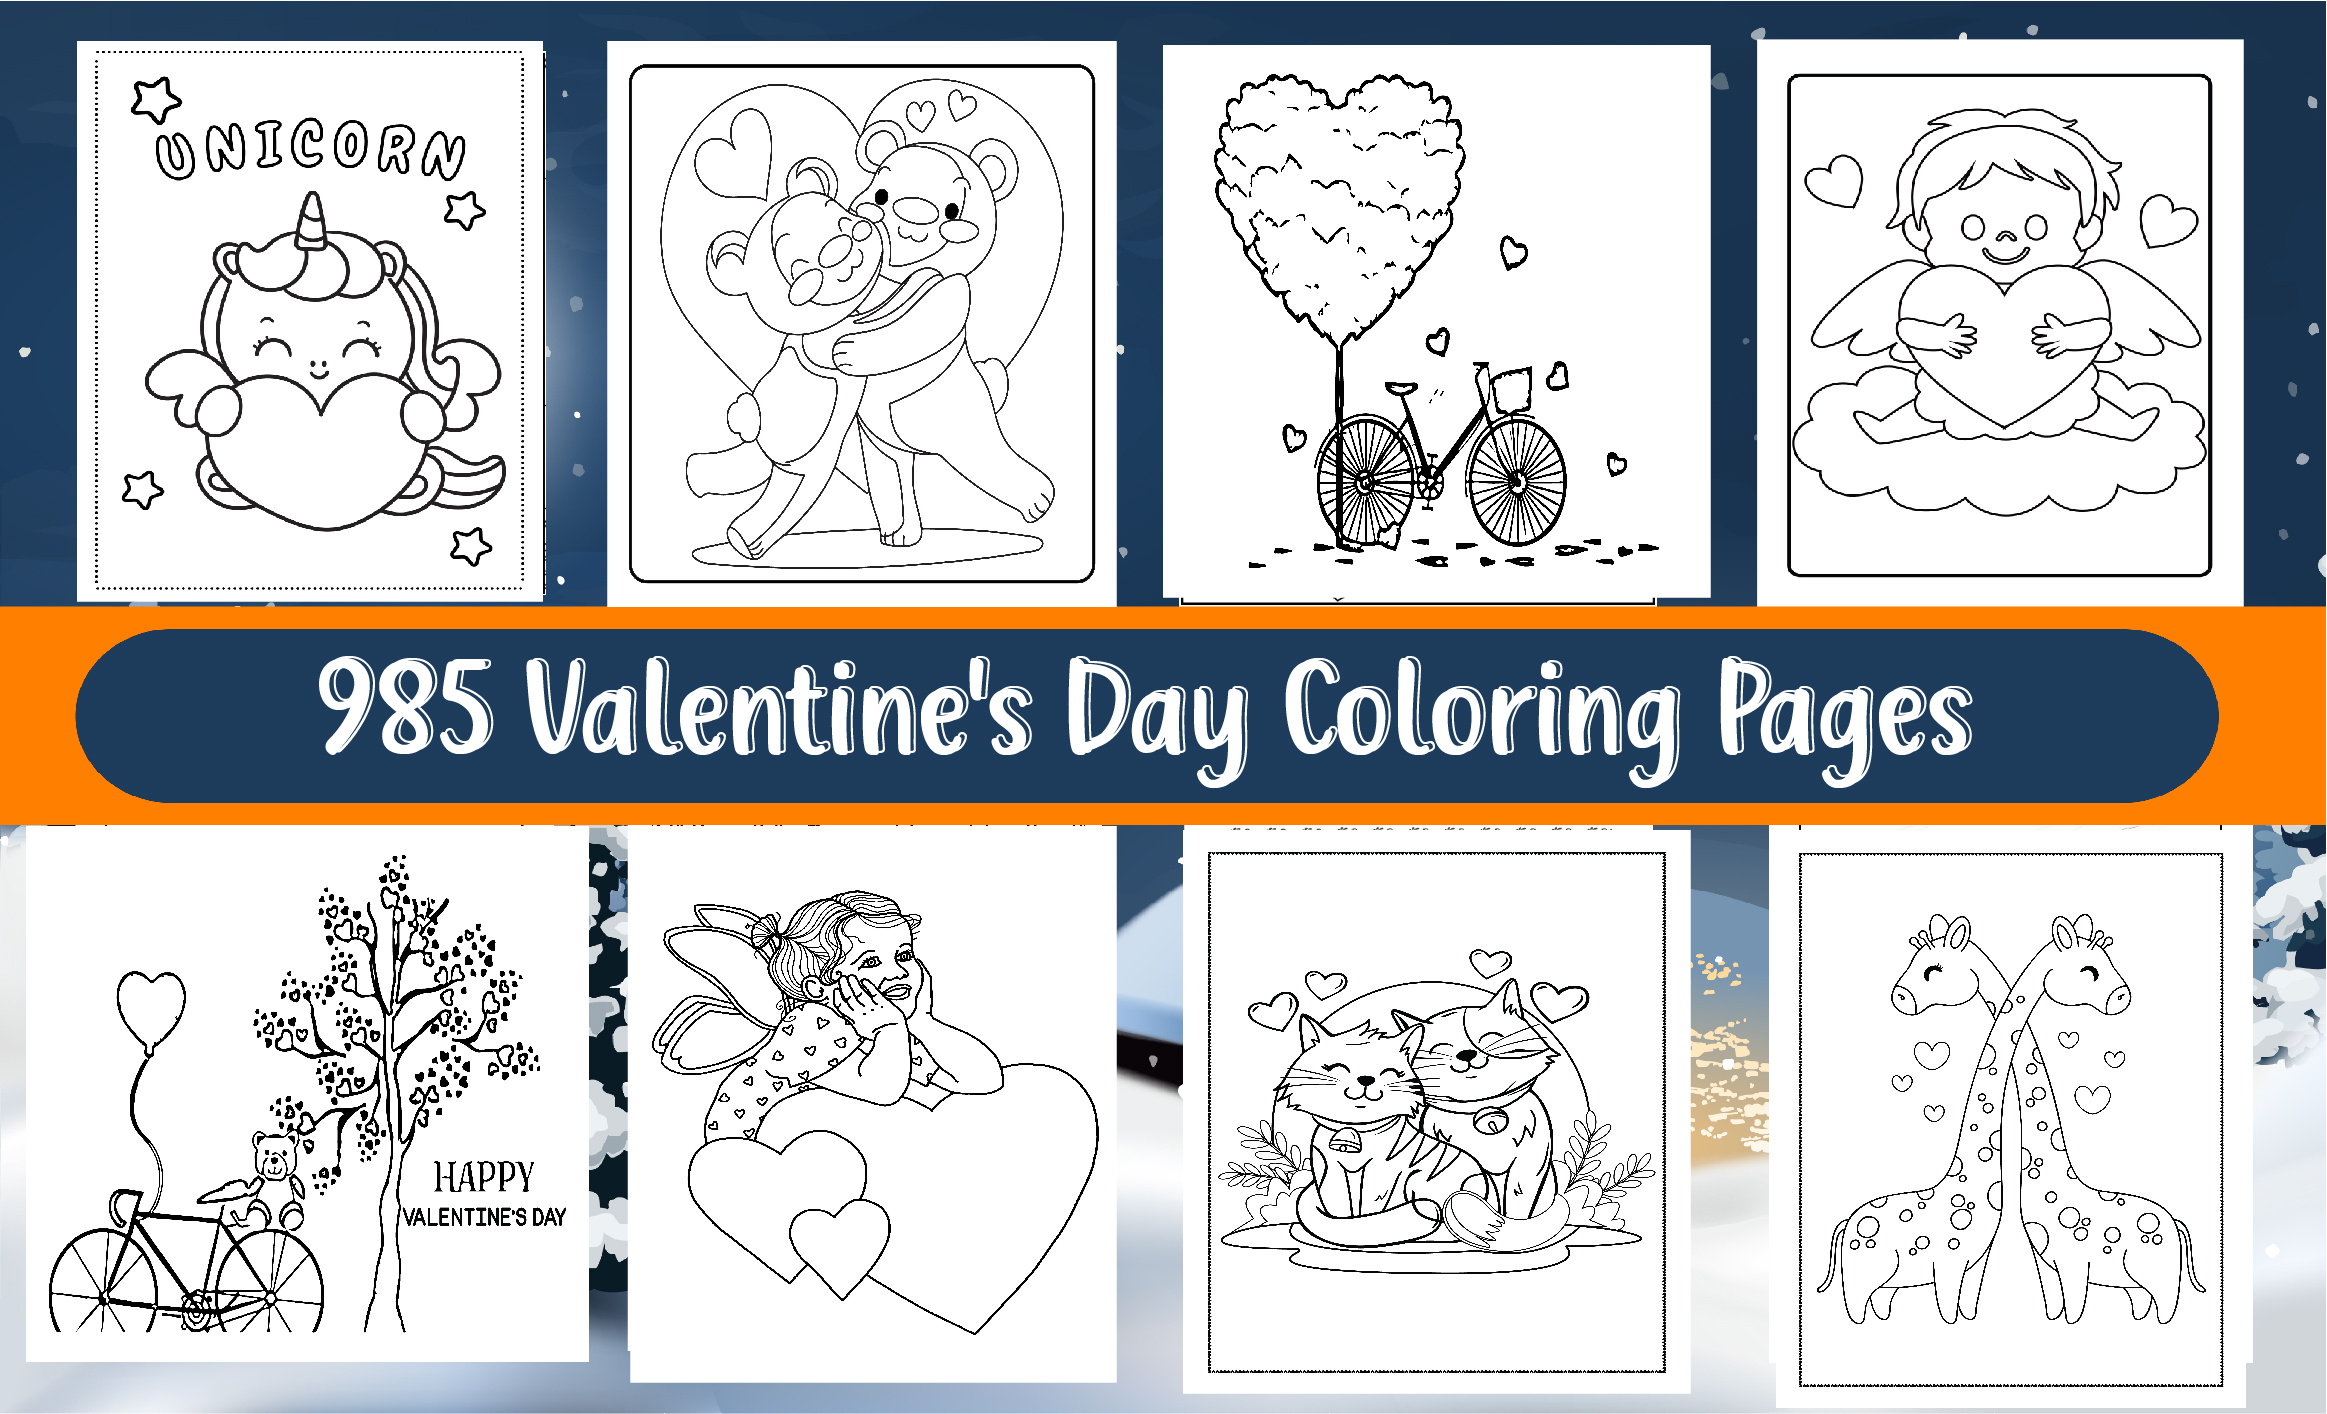 985 Valentine's Day Coloring Pages